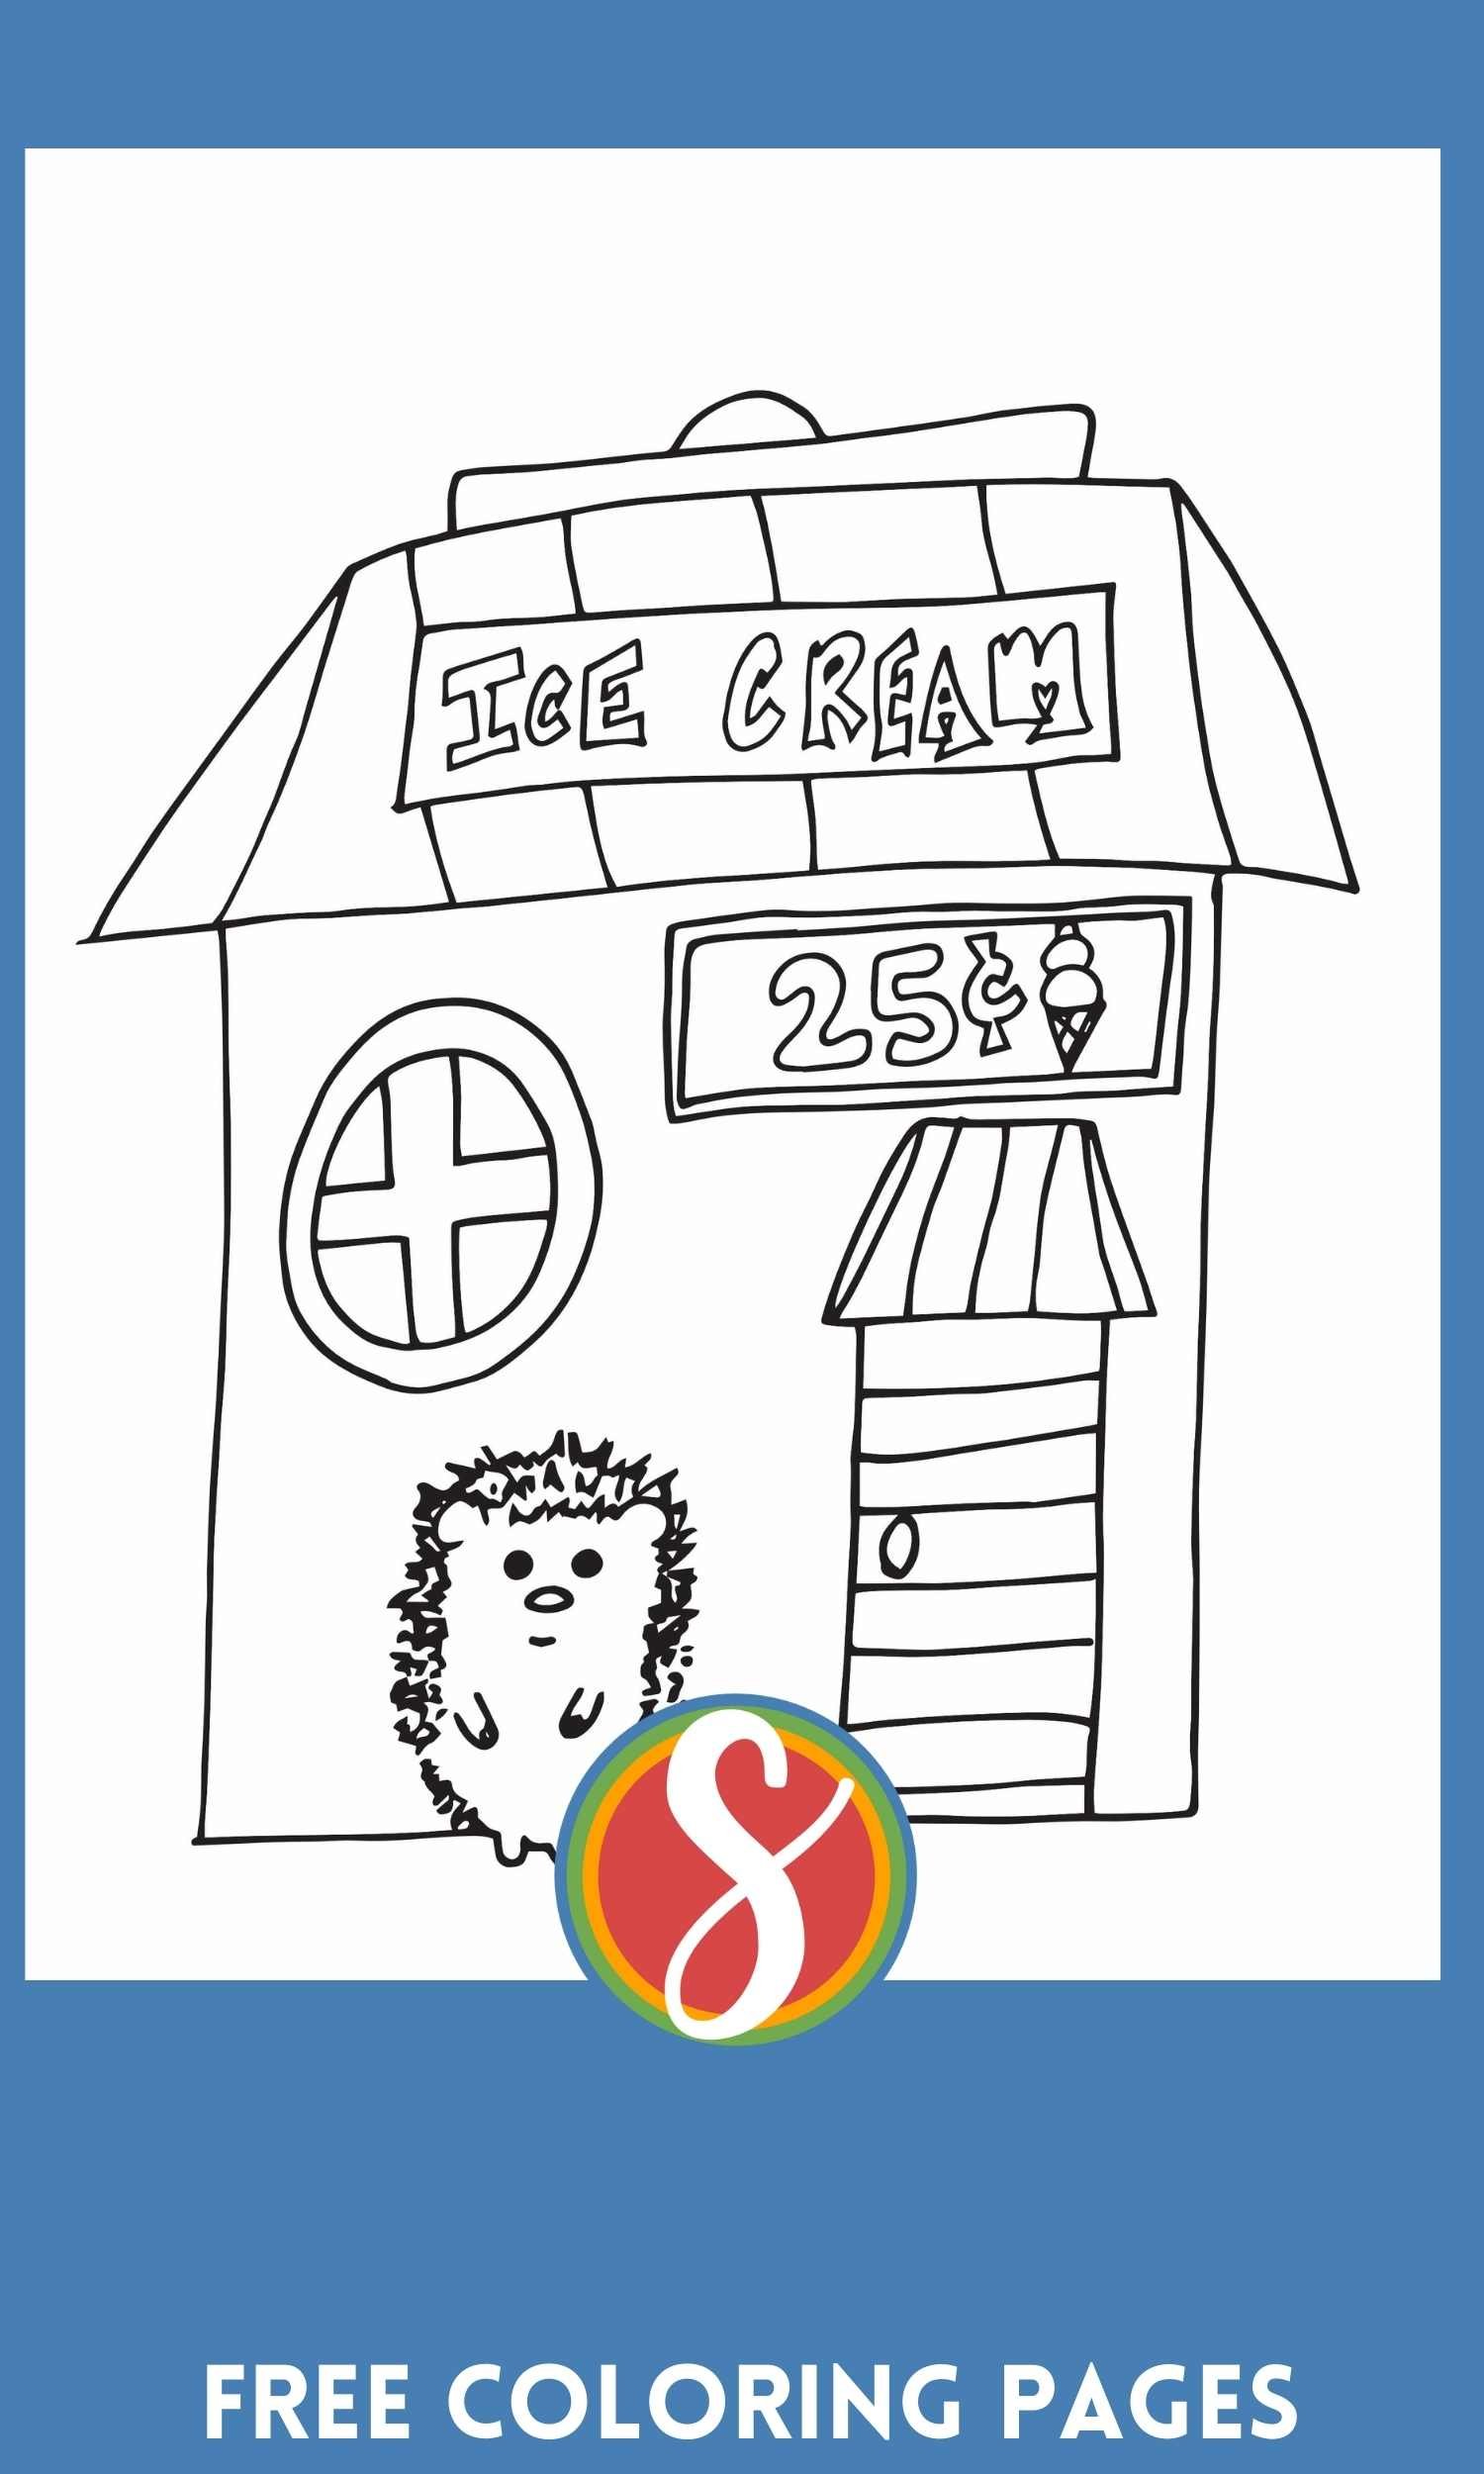 hedgehog coloring page with a cute ice cream shop where a hedgehog sells 25 cent ice cream